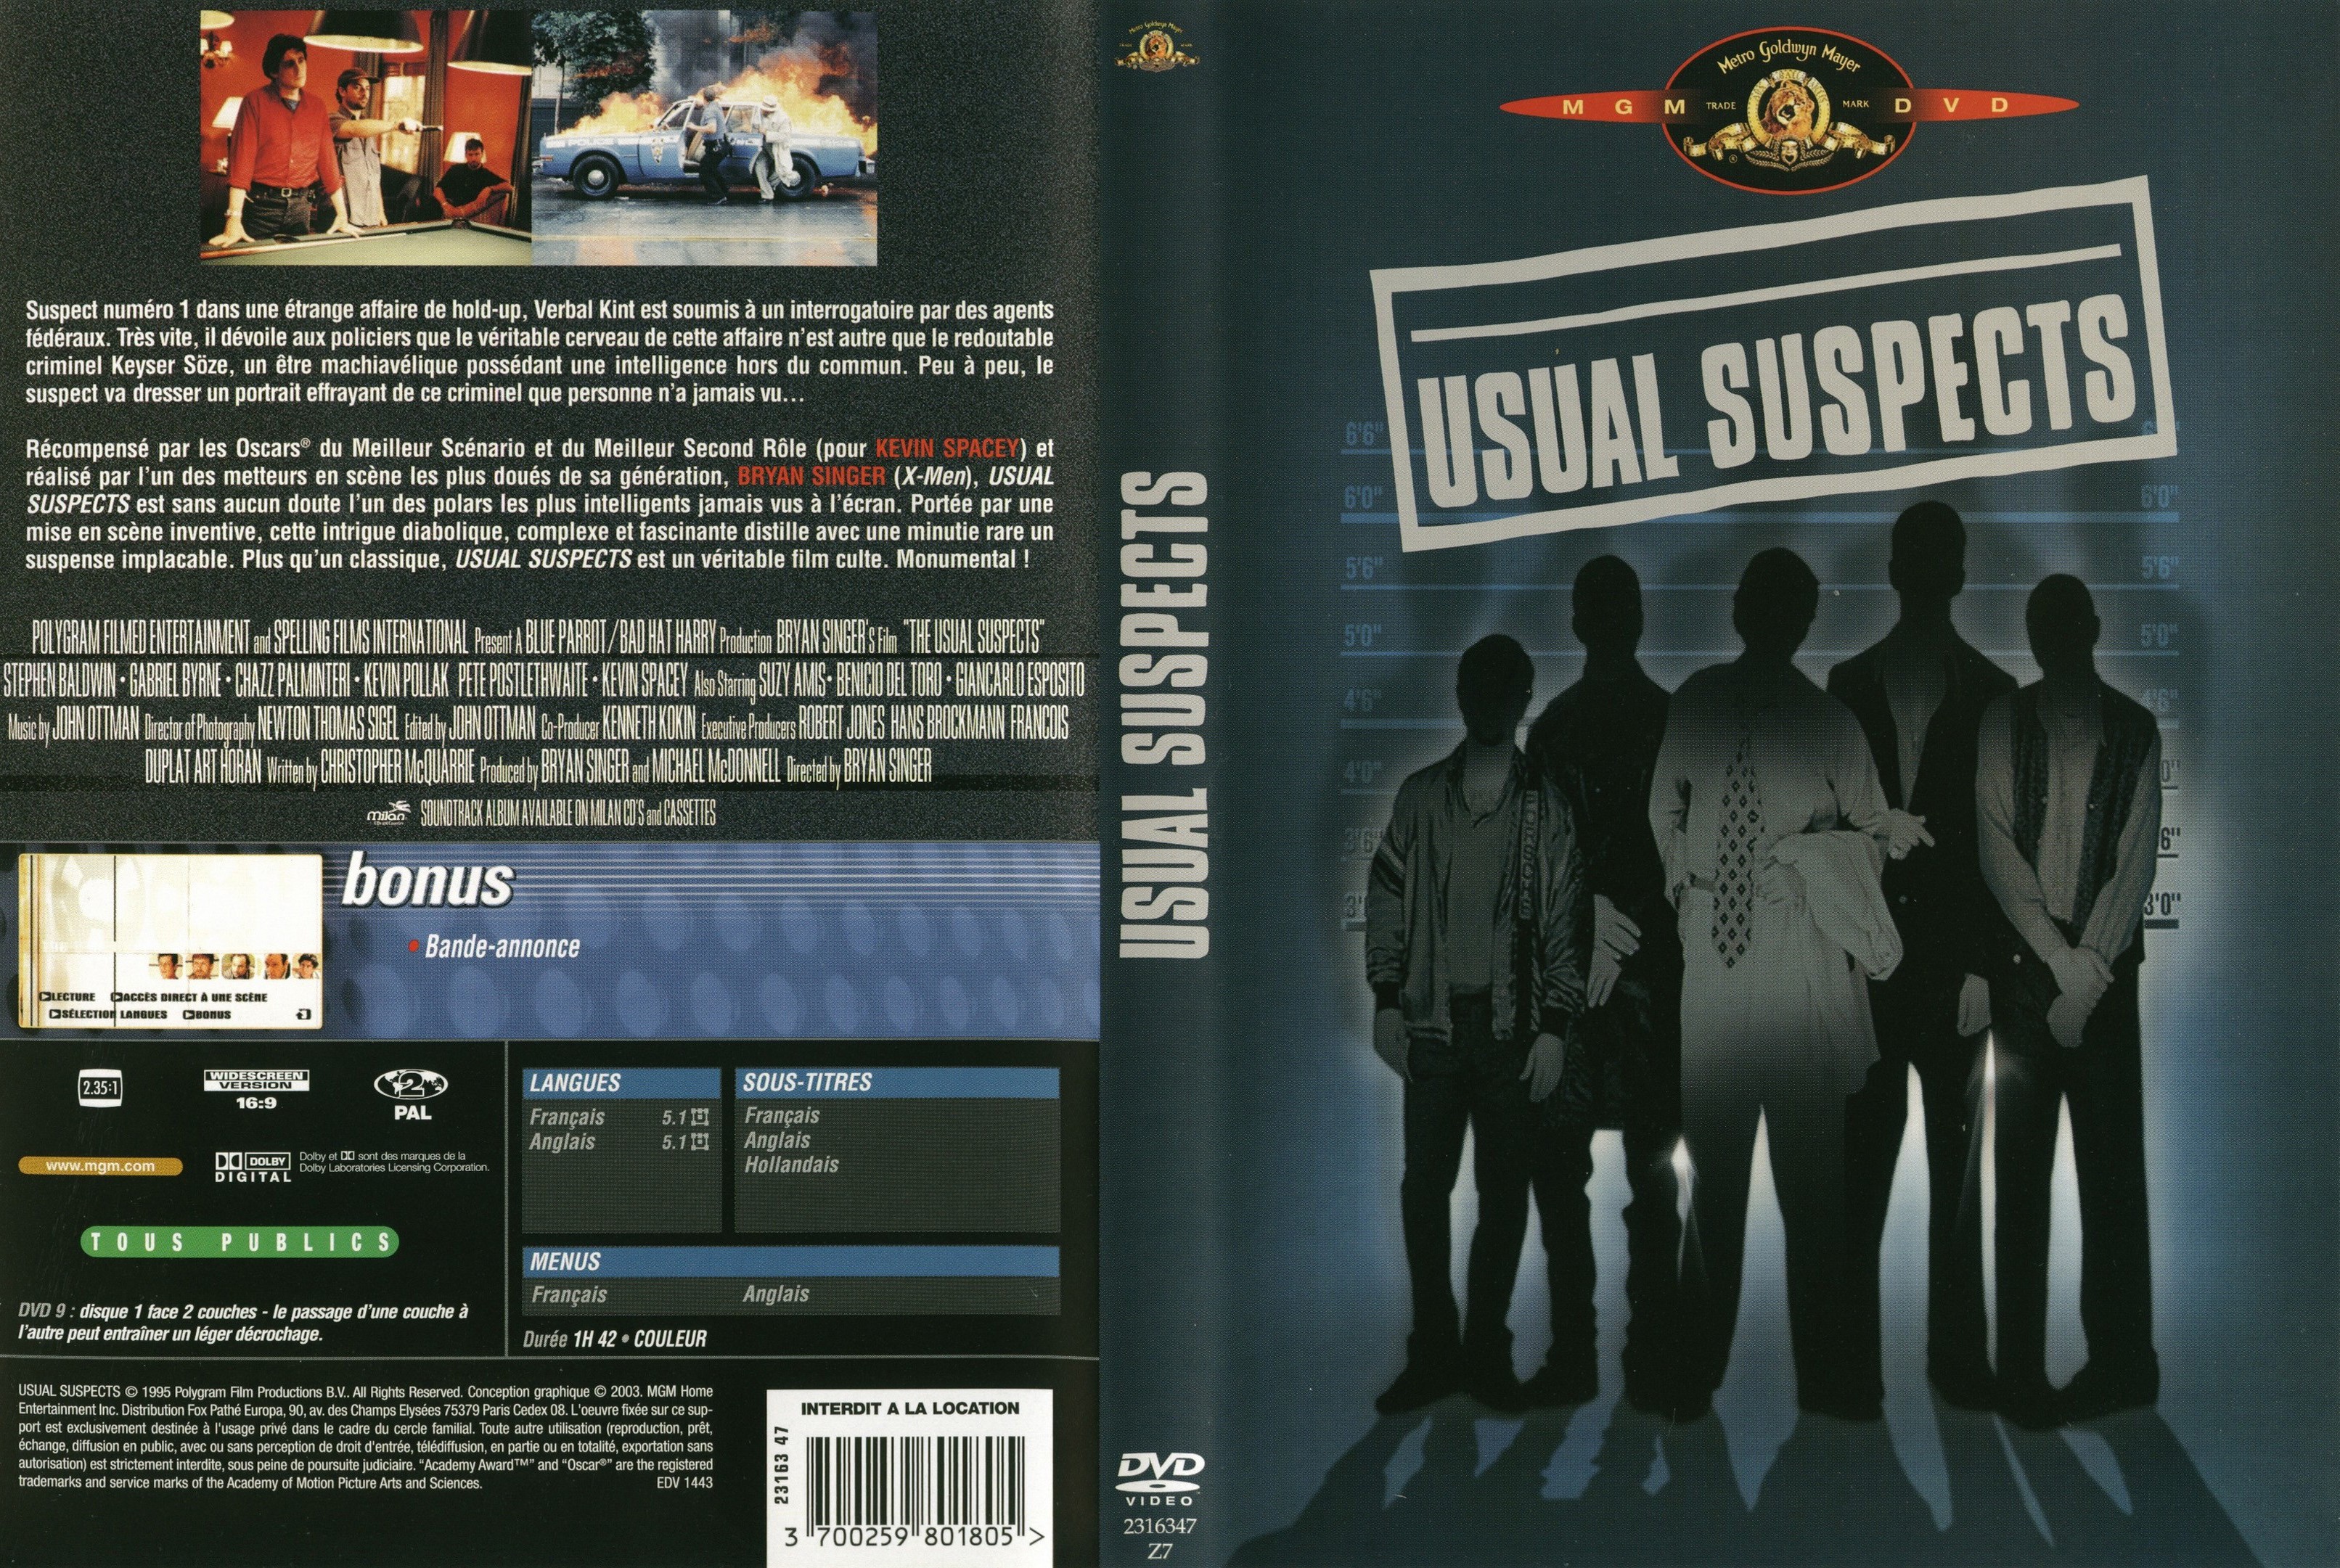 Jaquette DVD Usual suspects v2